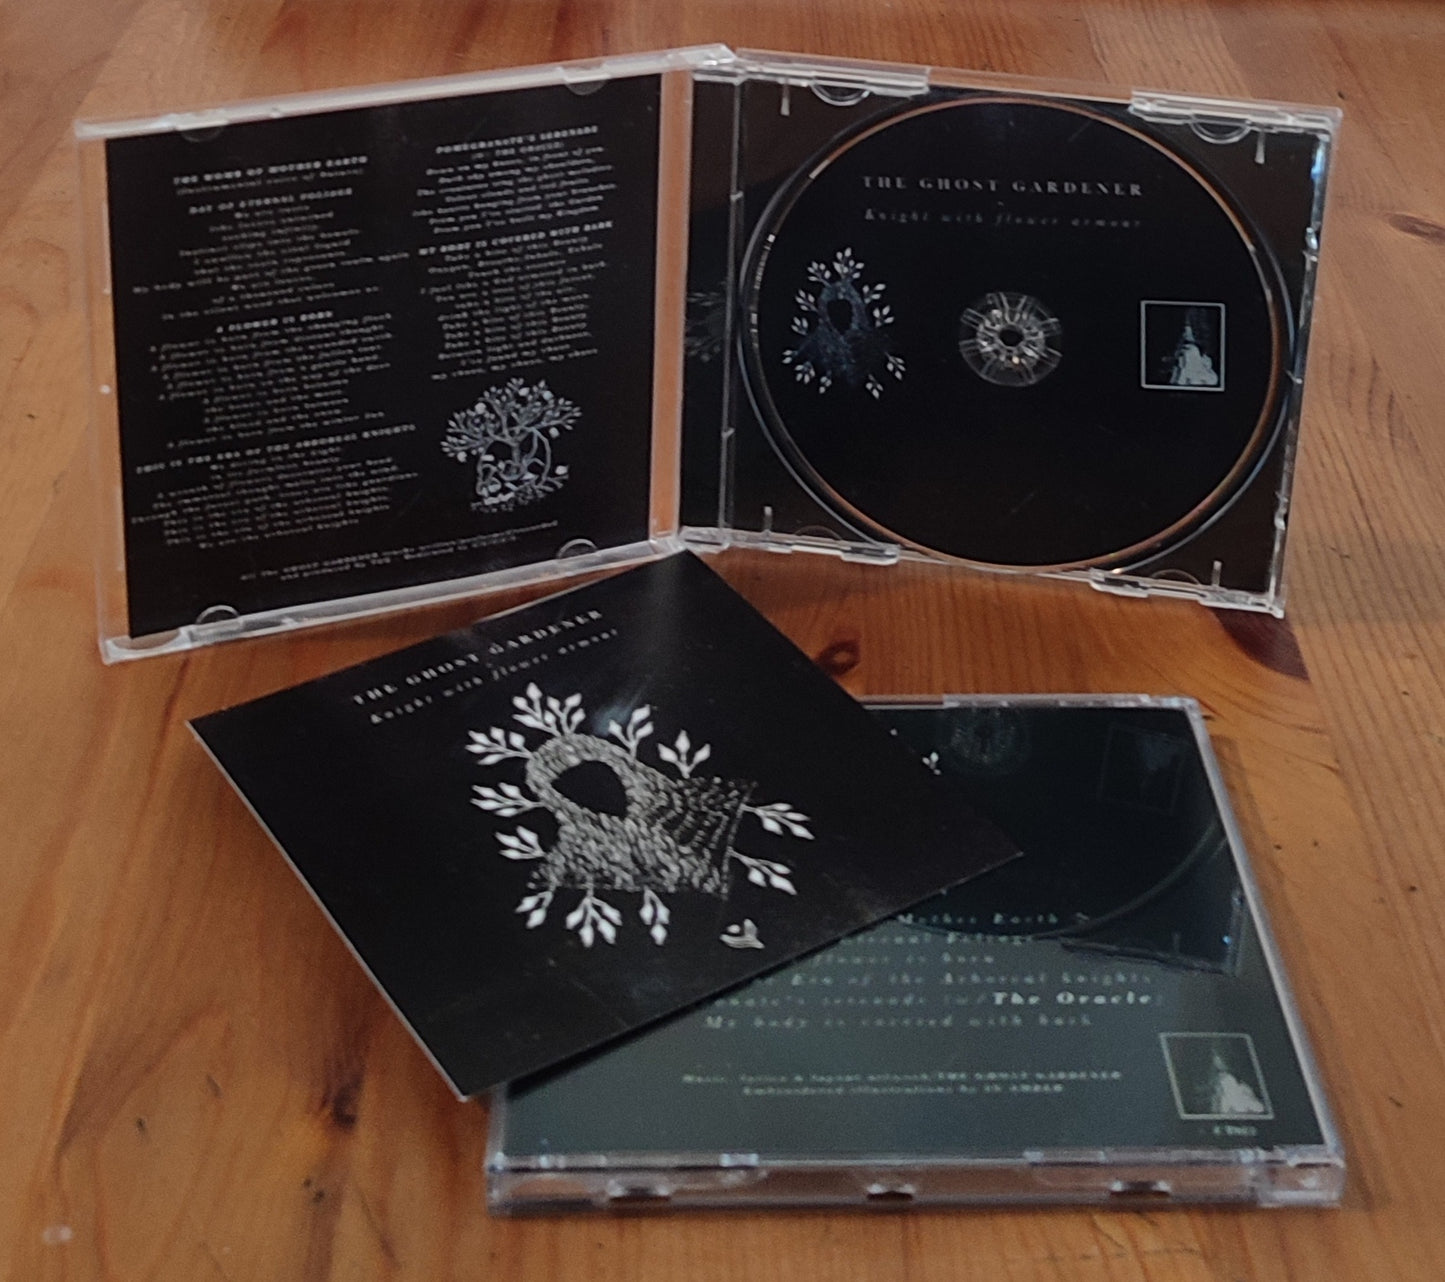 The Ghost Gardener (It) "Knight With Flower Armour" - CDs *New in Stock*